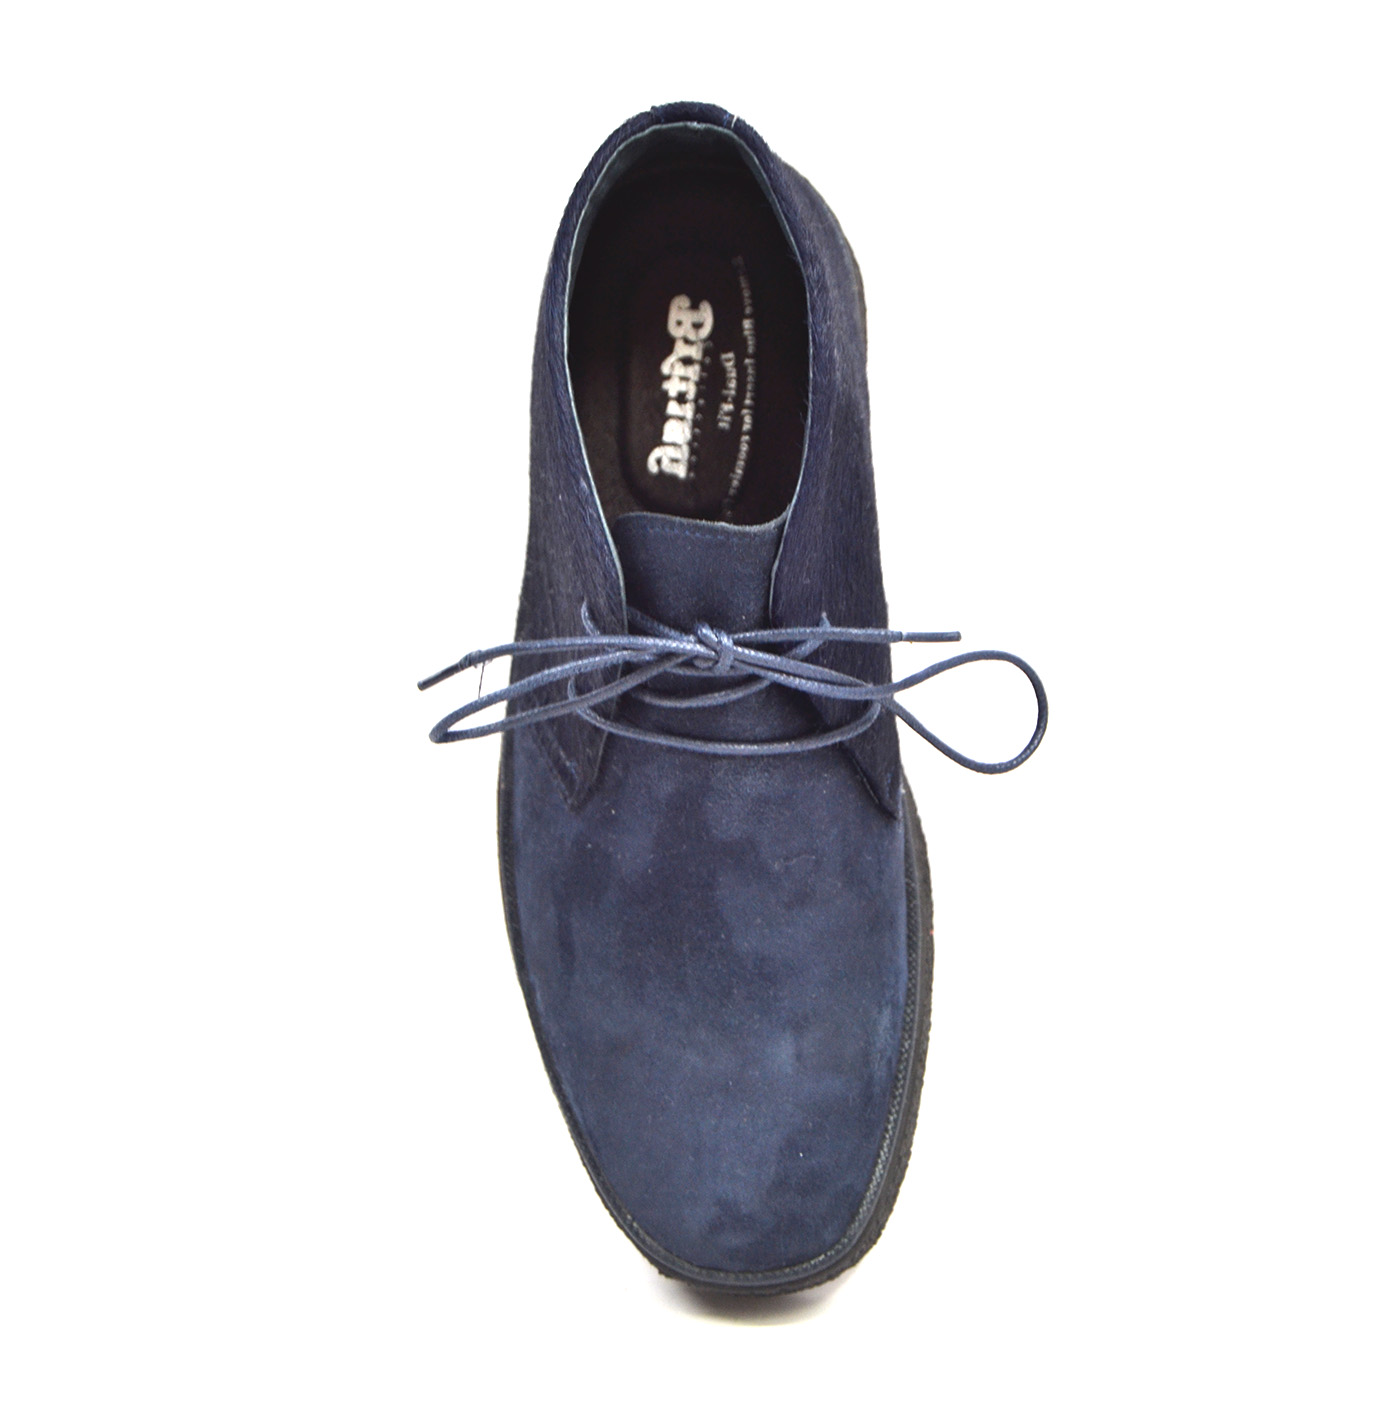 Classic Playboy Chukka Boot Two Tone Navy Suede and Pony Skin [1226-61 ...